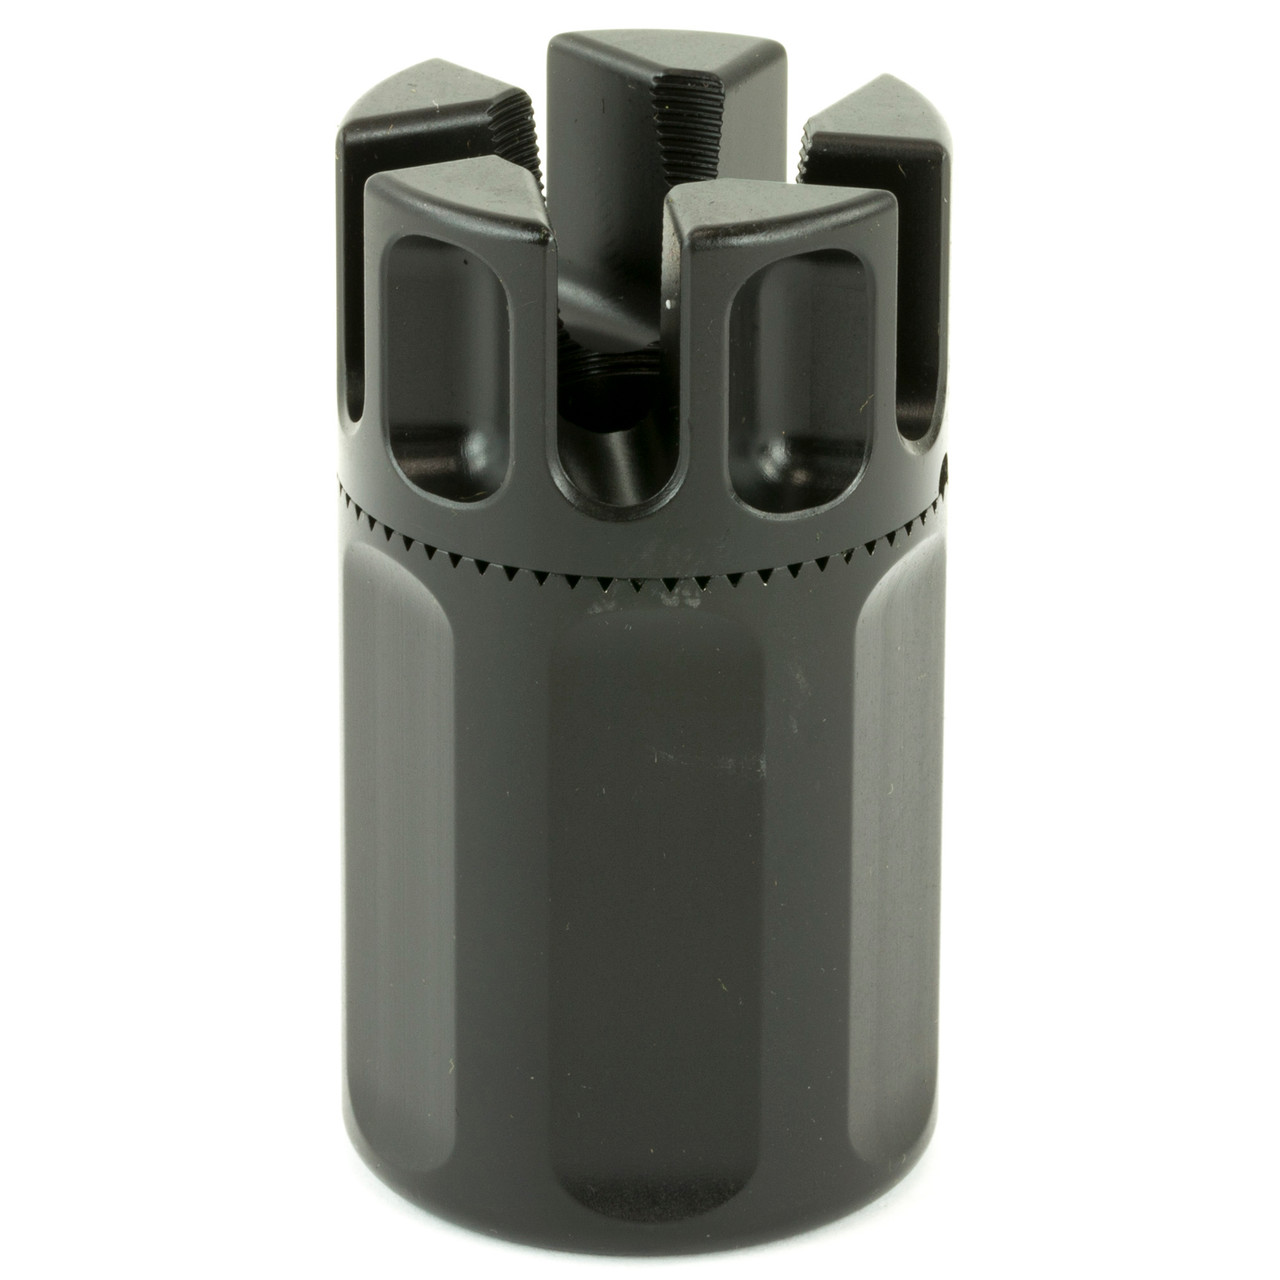 Primary Weapons Systems CQB 1/2x28 5.56/.223 Blast Compensator Can Steel - Black (CT35PWS3CQB12A1)